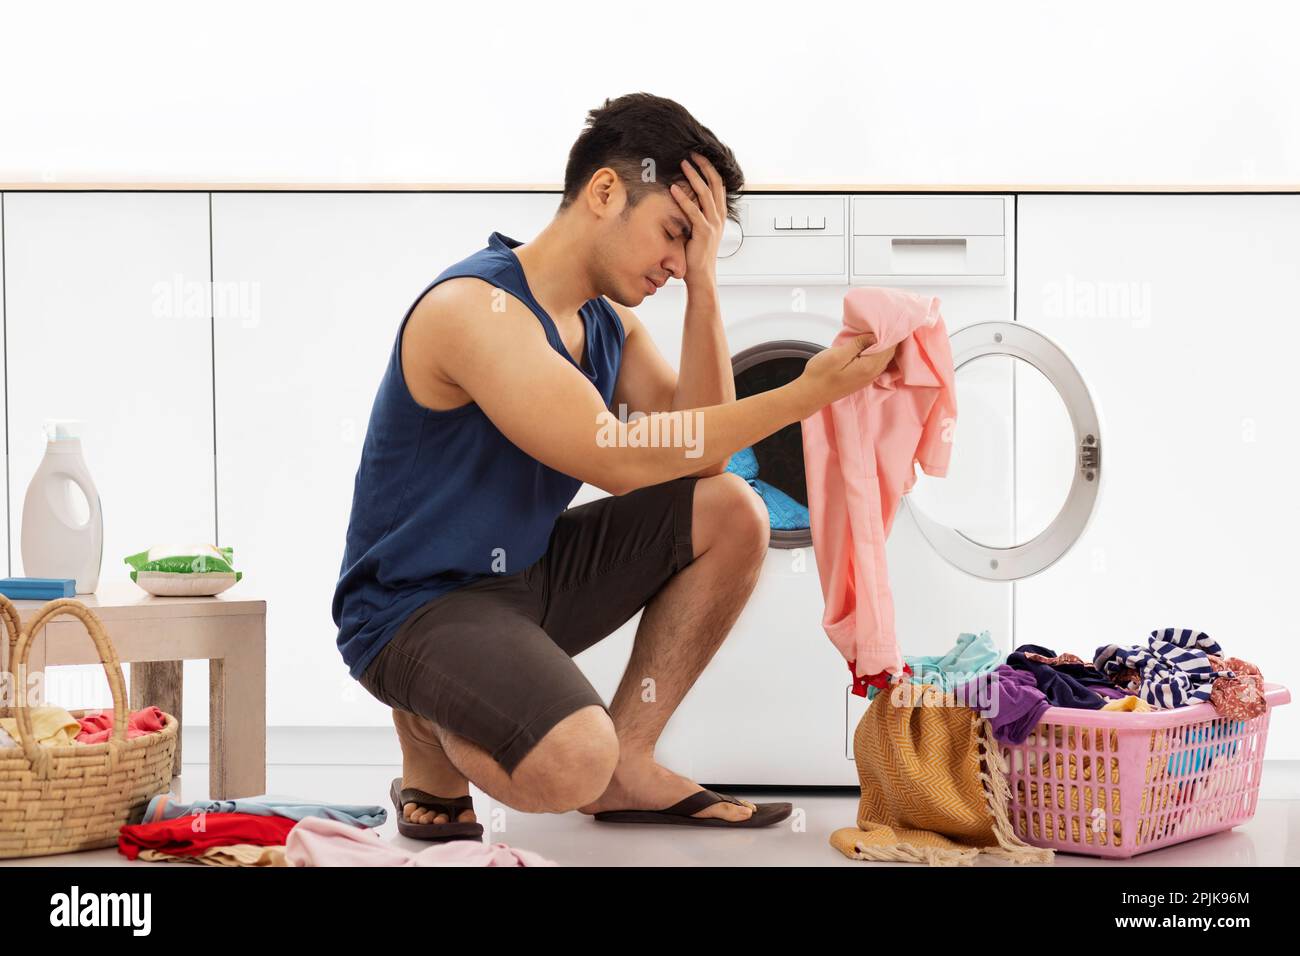 Portrait of a tired young man doing laundry Stock Photo